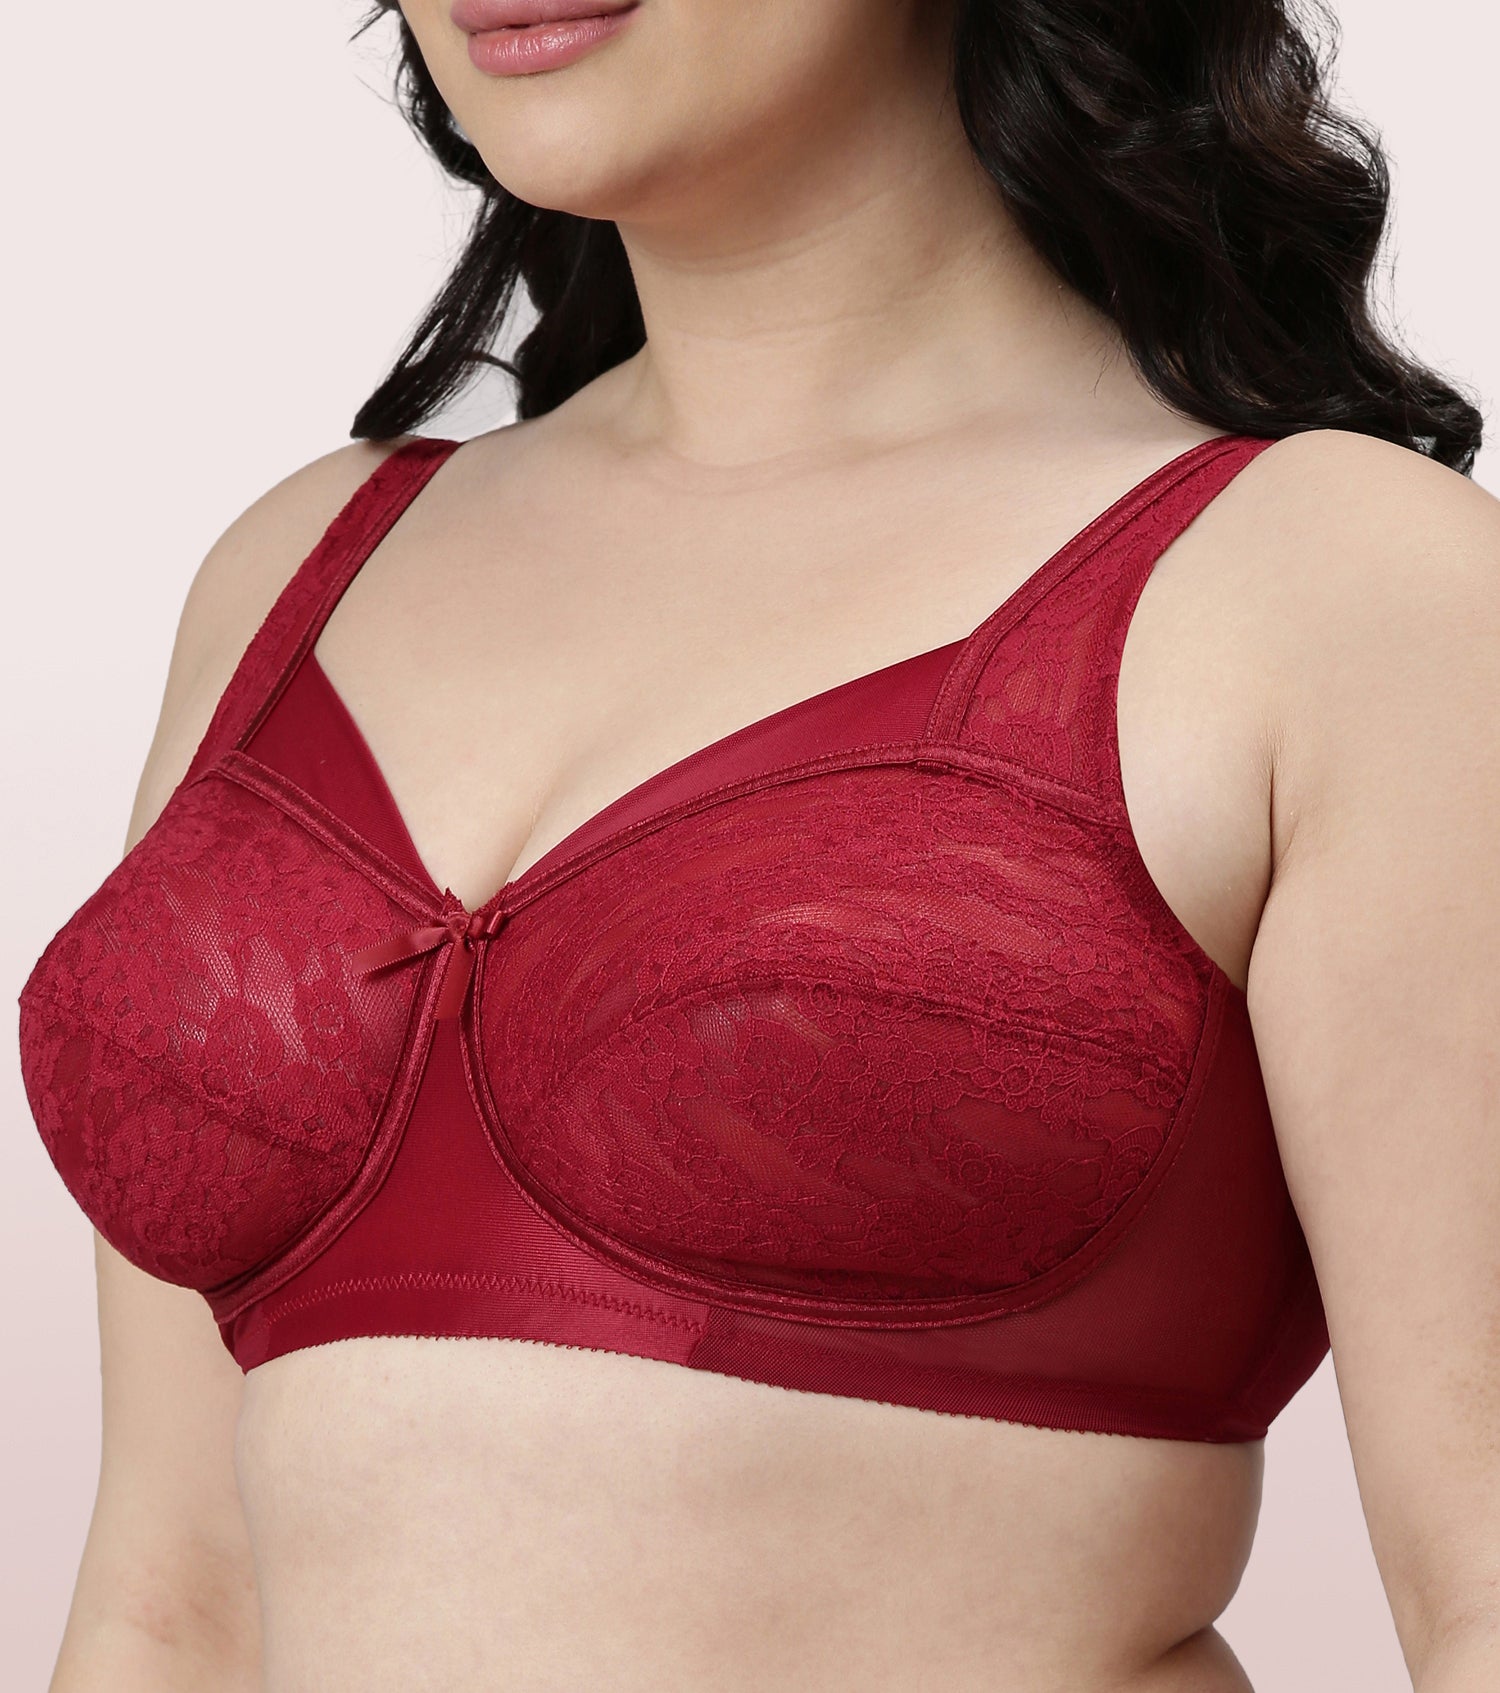 Bras for Women Full Coverage Underwire Bras Plus Size,Lifting Lace